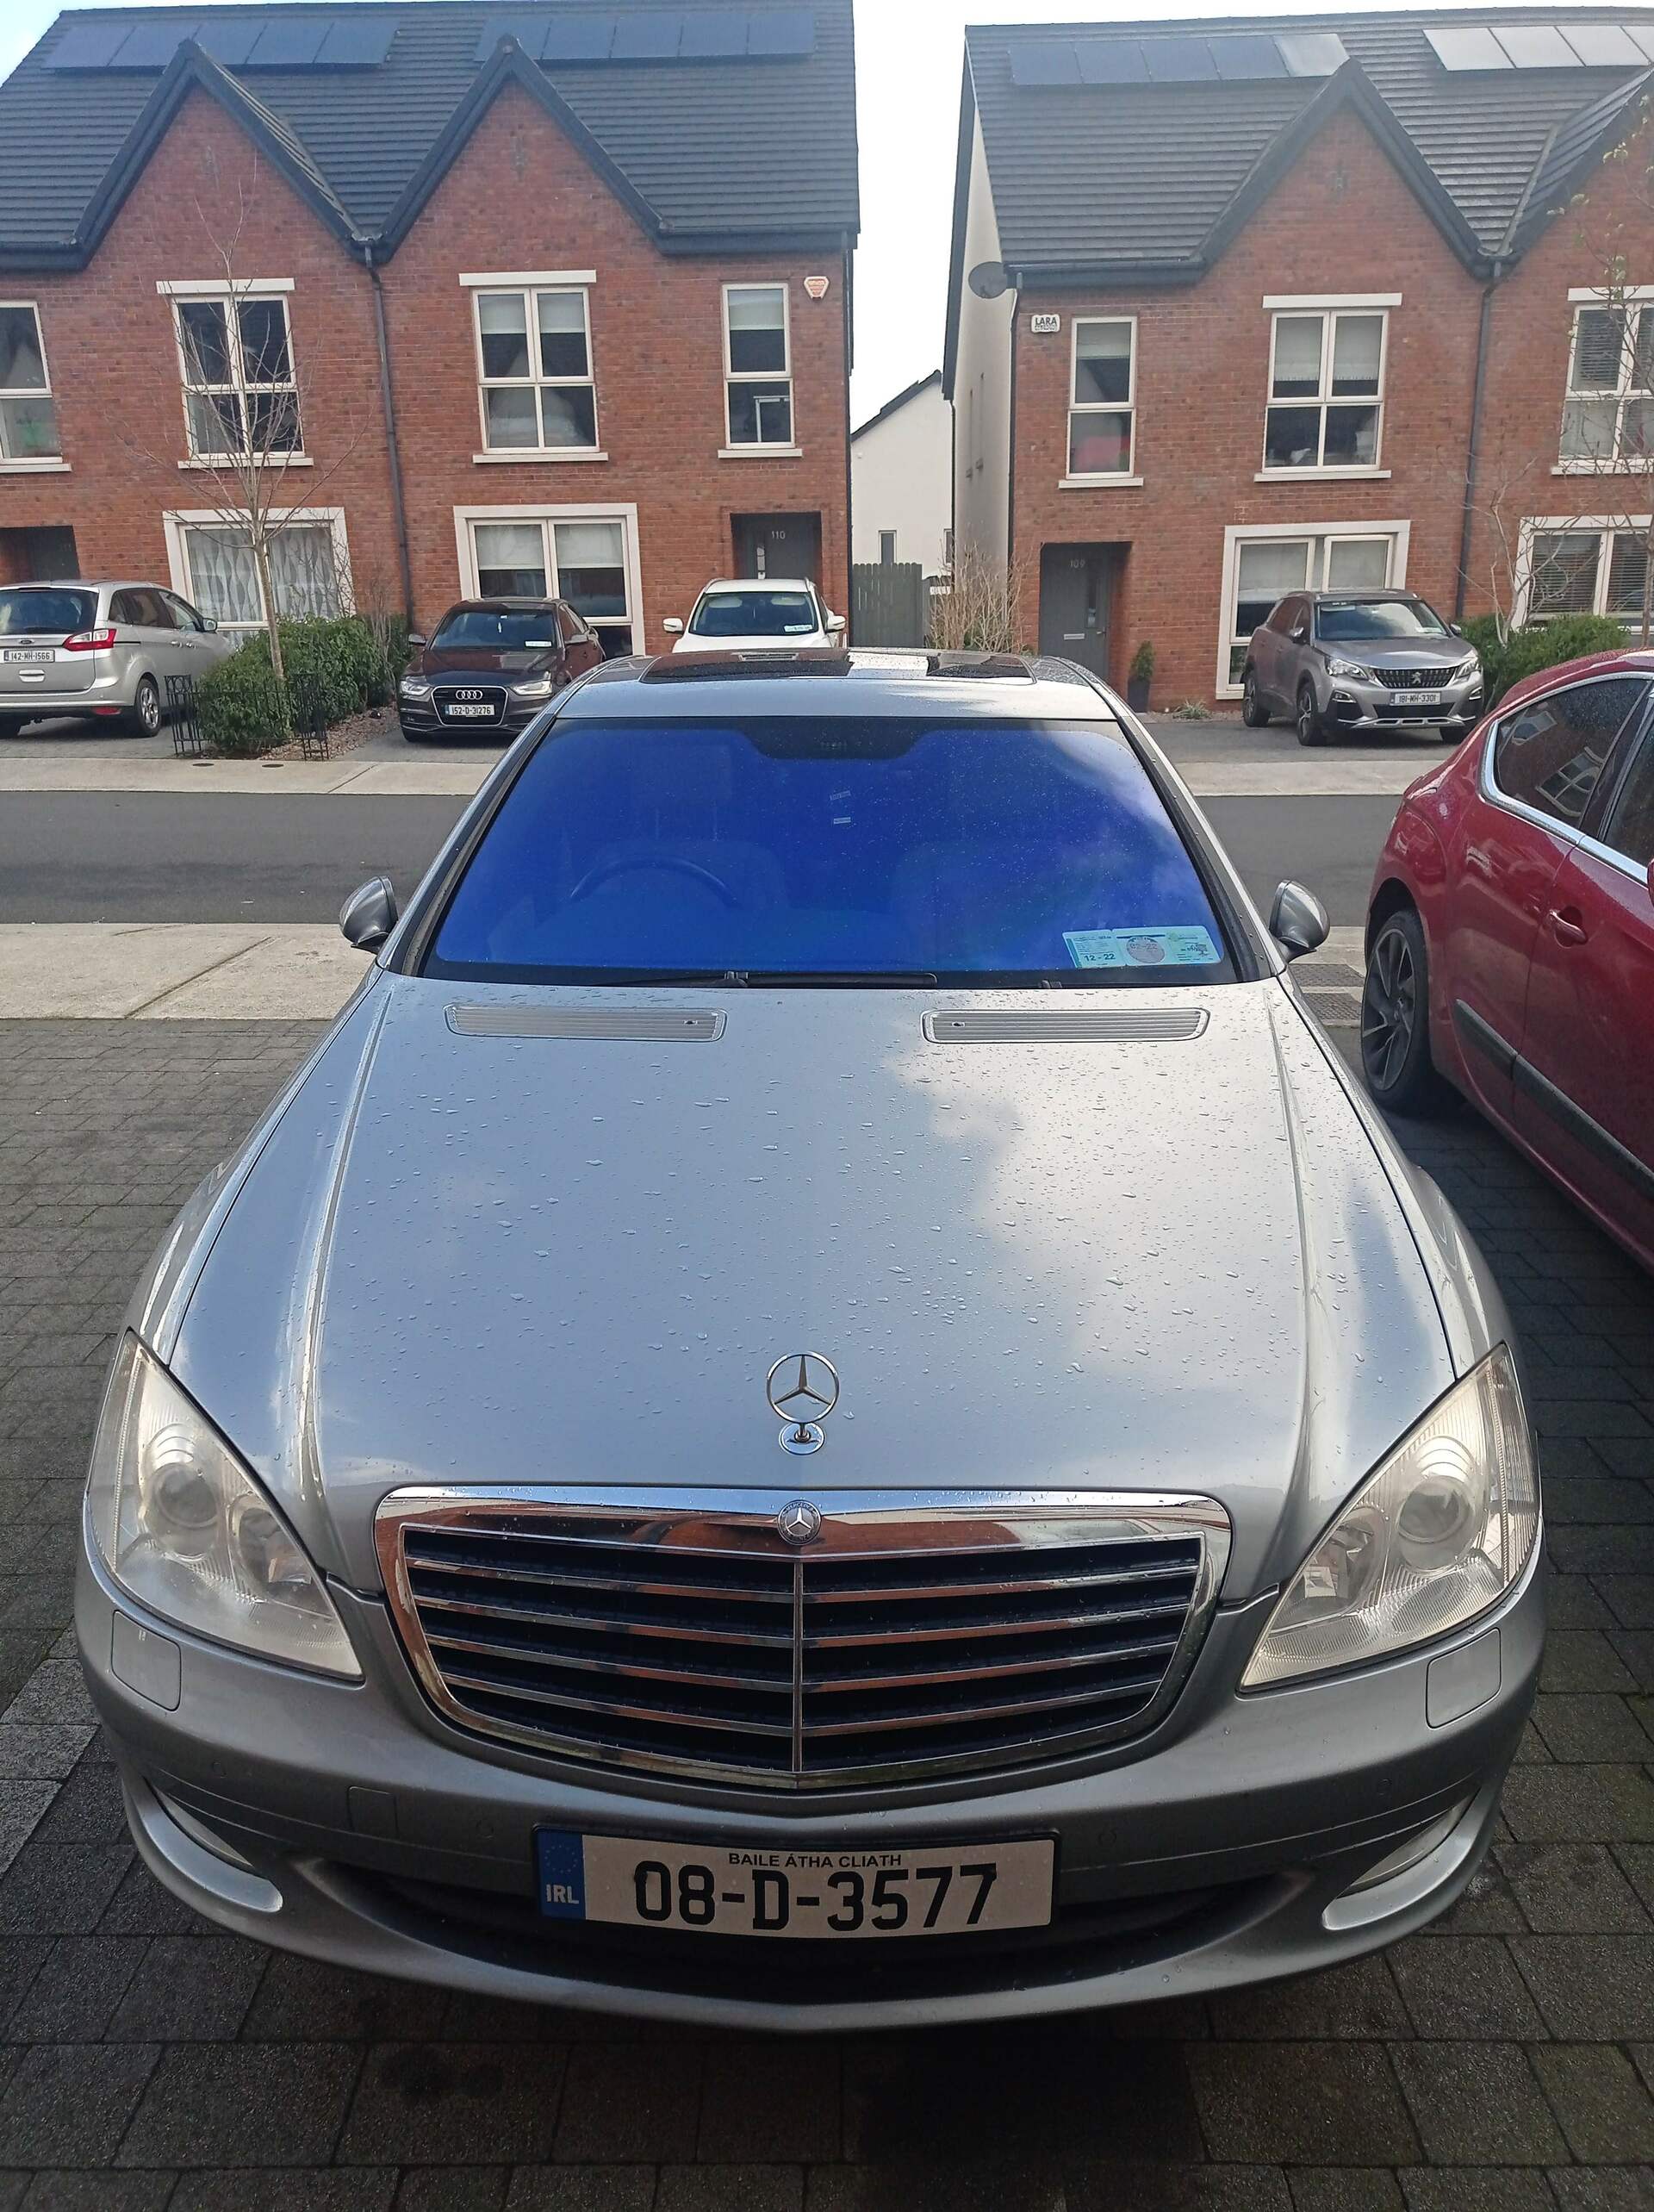 Used Mercedes-Benz S-Class 2008 in Meath